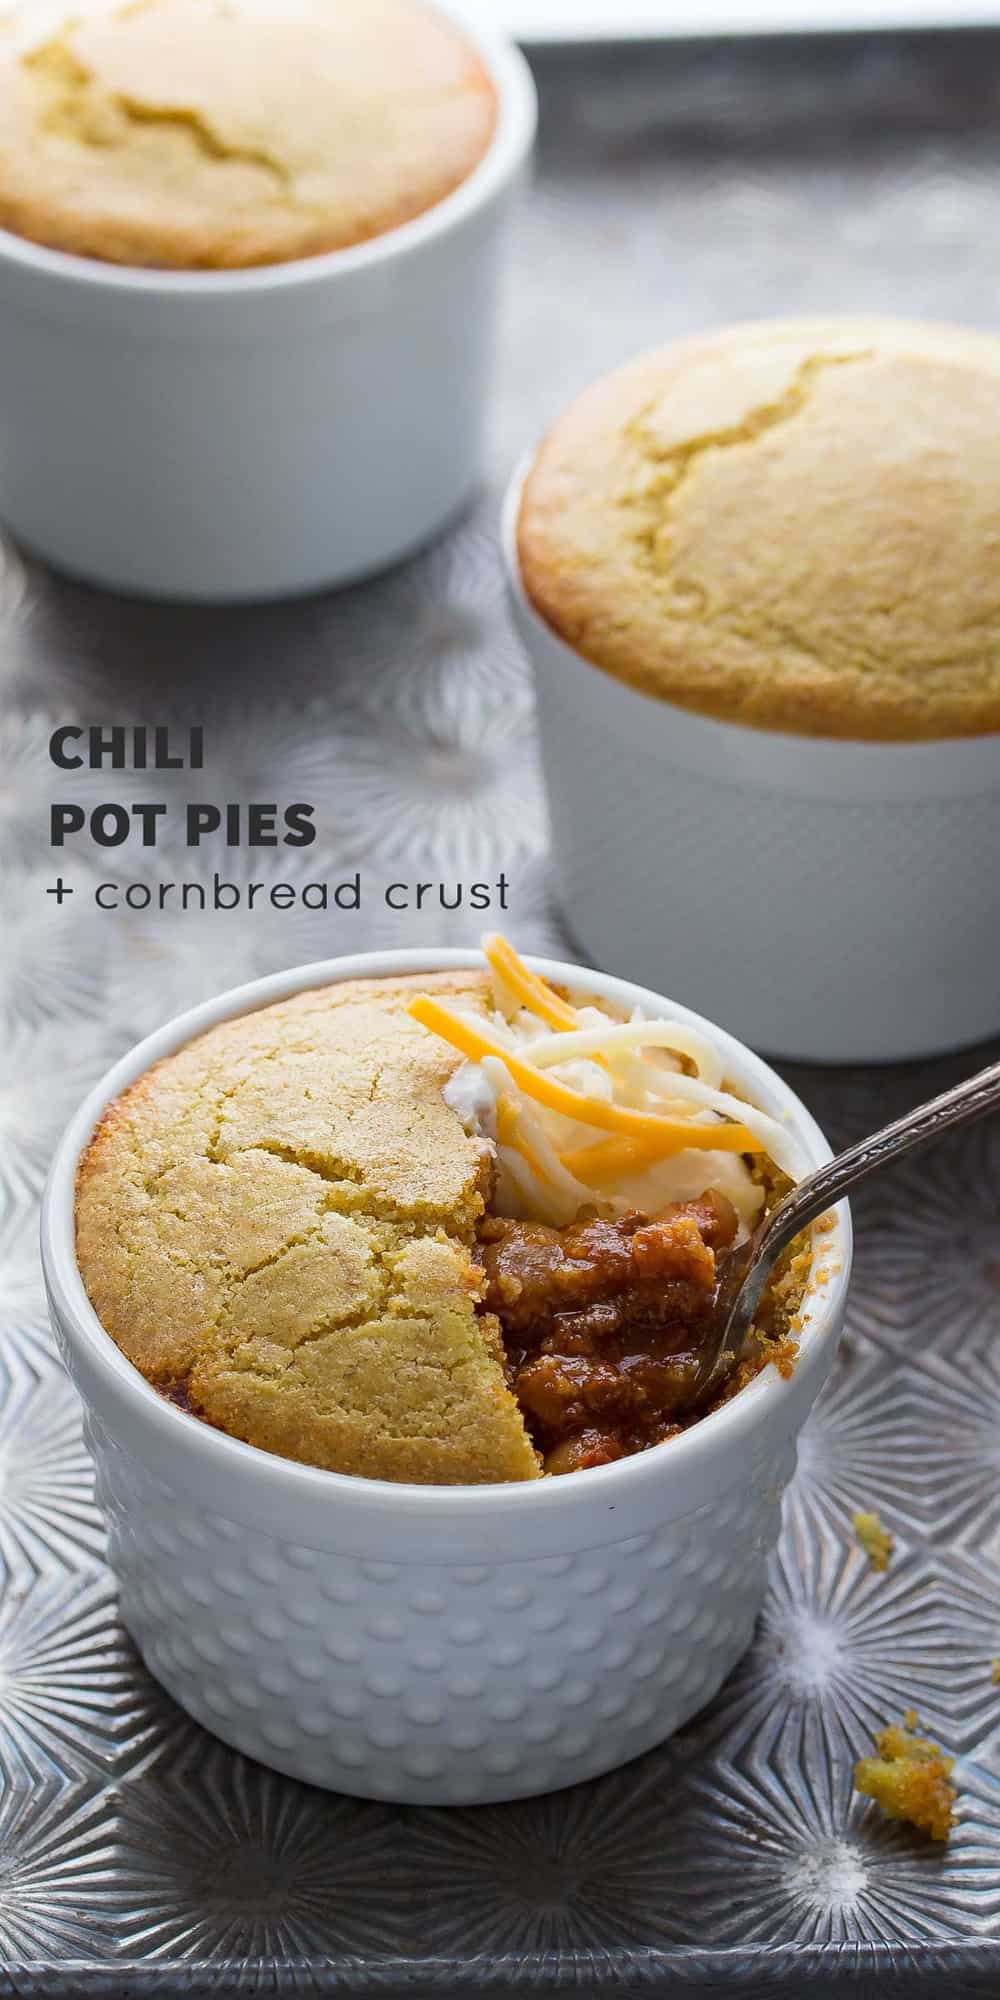 A simple recipe to use up leftover chili! Baked up in a personal-sized portion, and topped with a delicious cornbread topping!